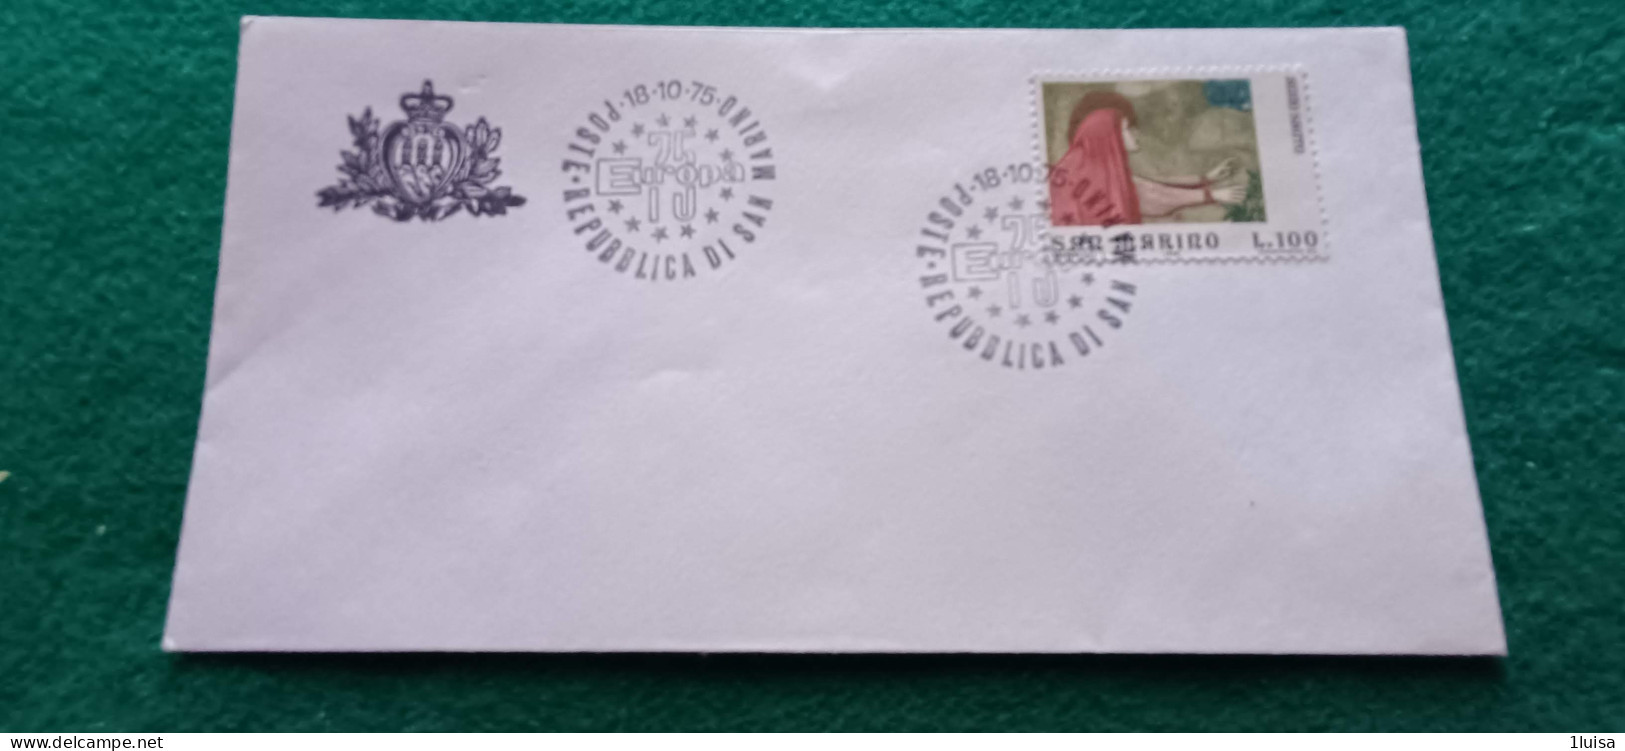 SAN MARINO 18/10/75 Europa - Express Letter Stamps